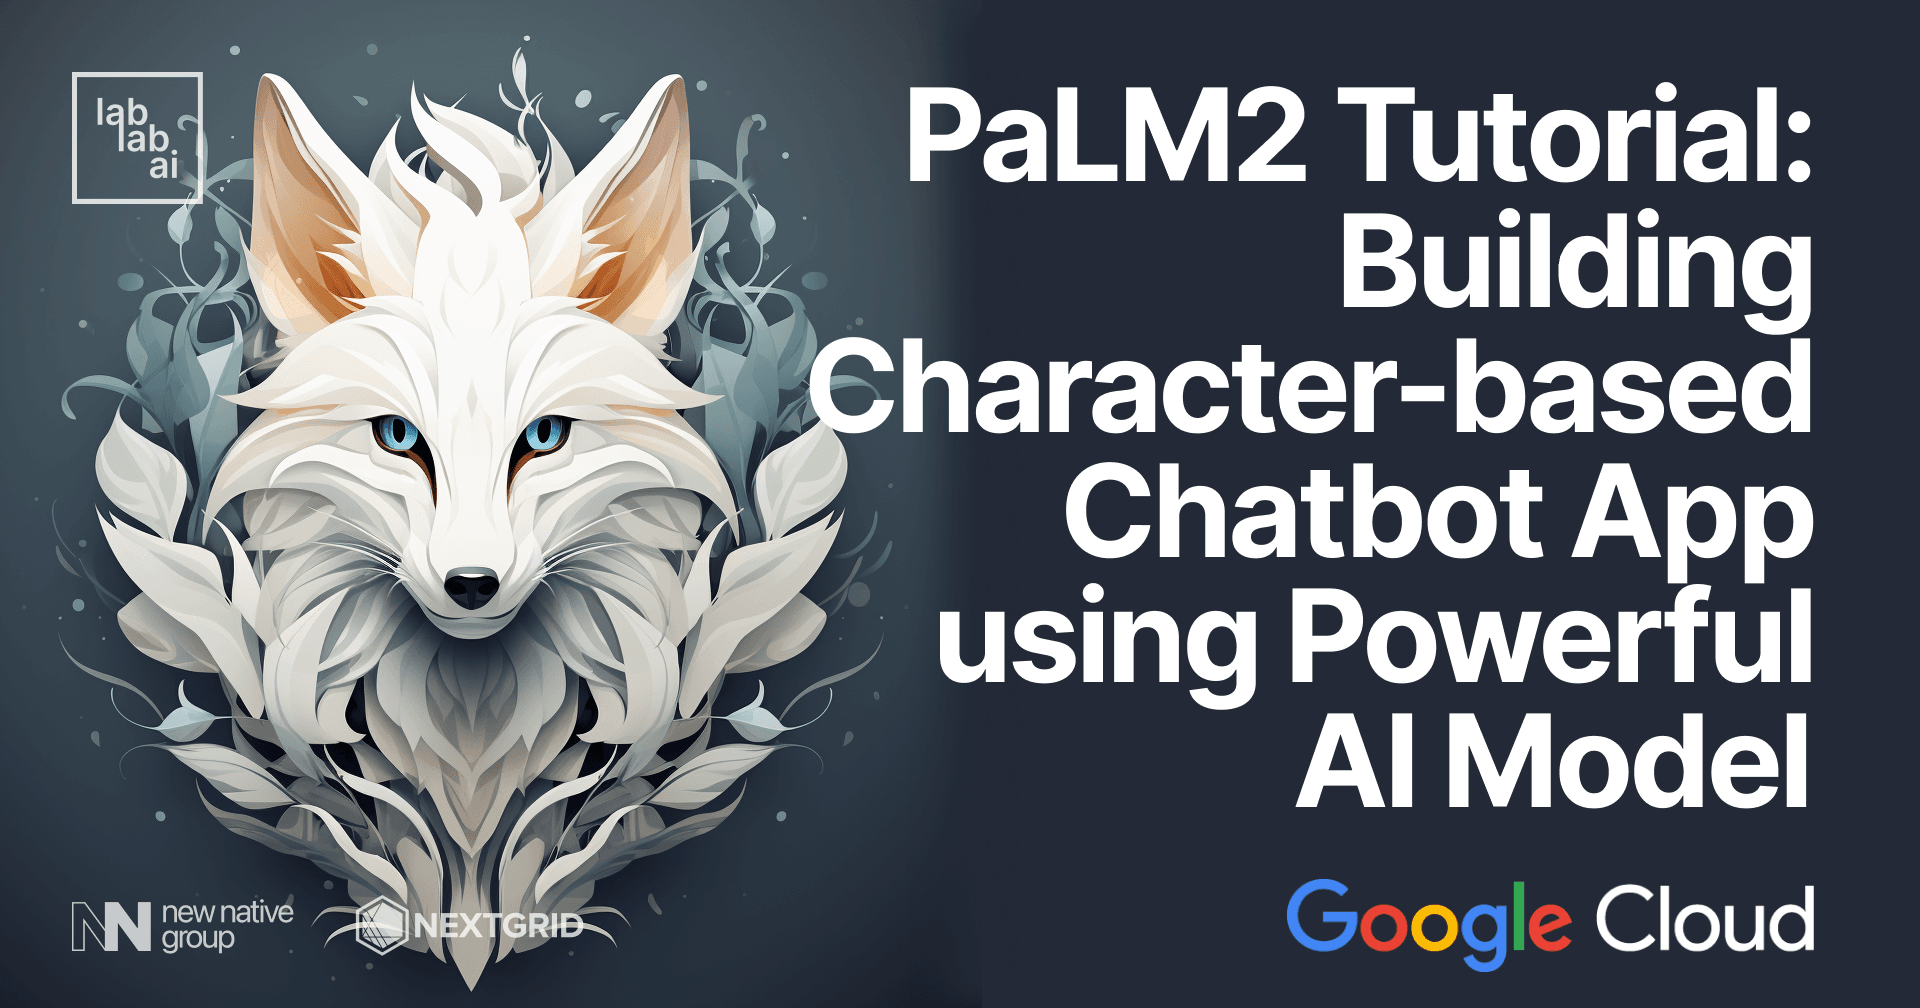 PaLM2 Tutorial: Building Character-based Chatbot App using Powerful AI Model